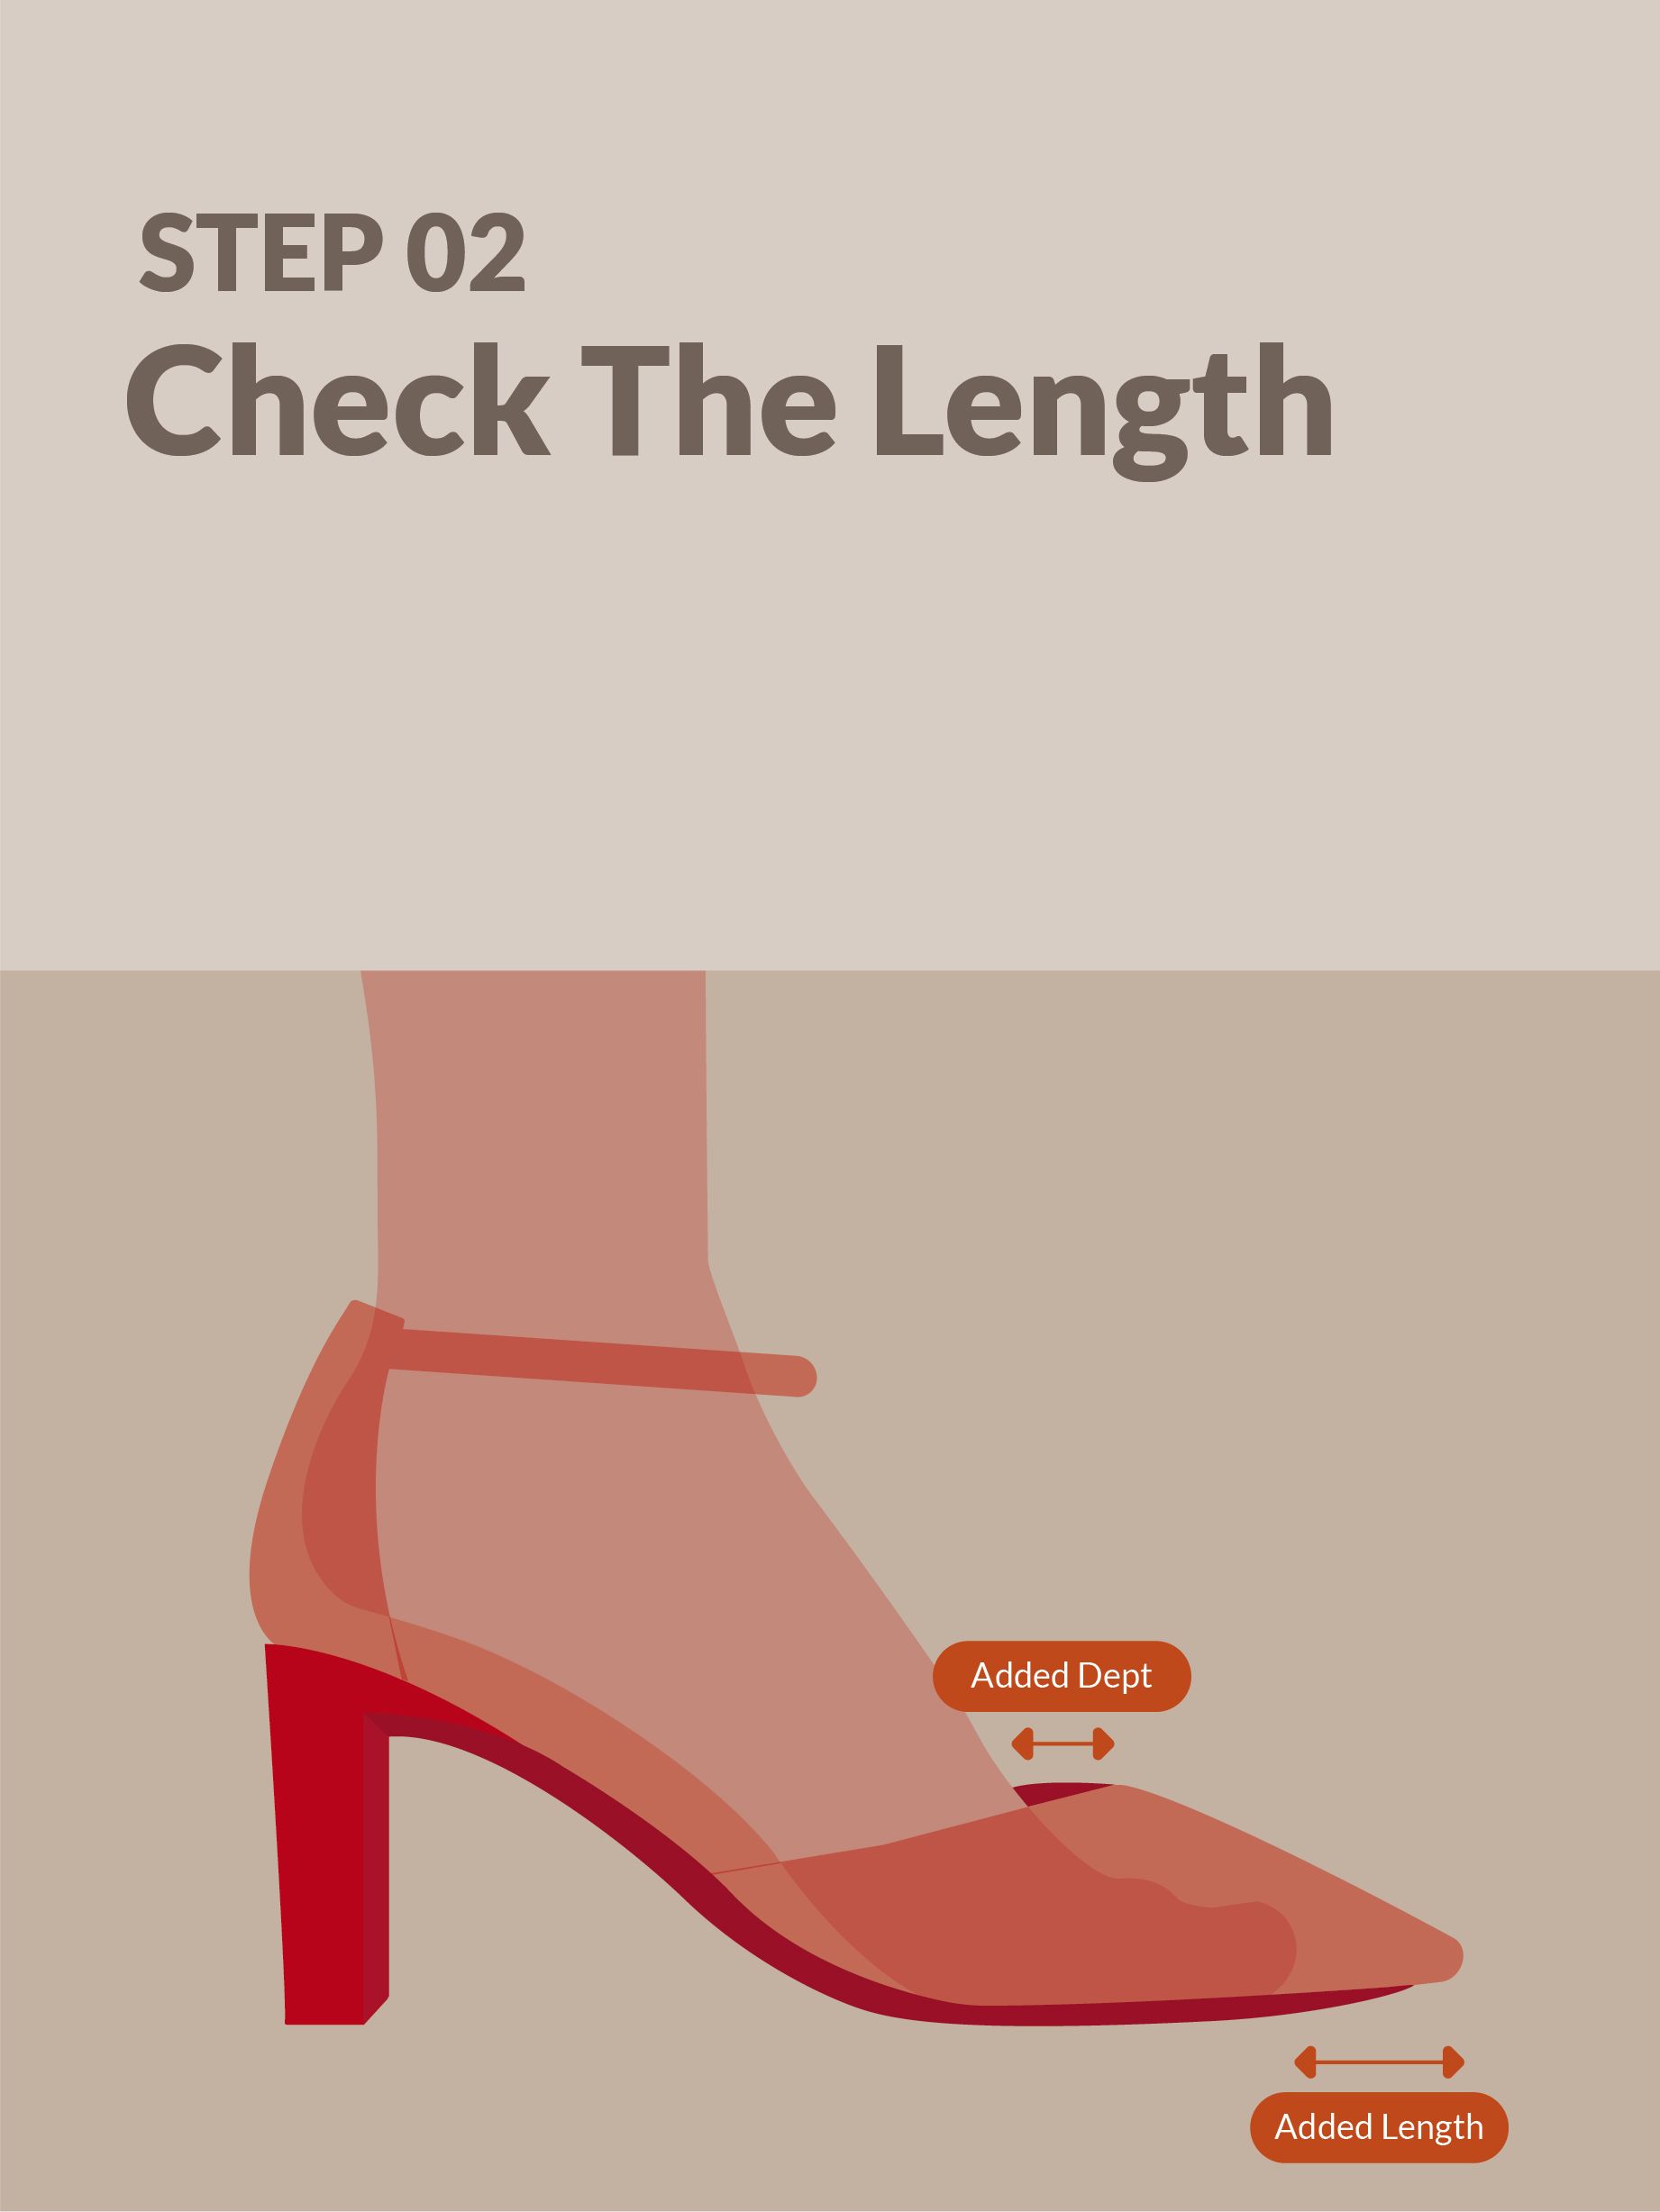 How to check your shoes fit and feel good